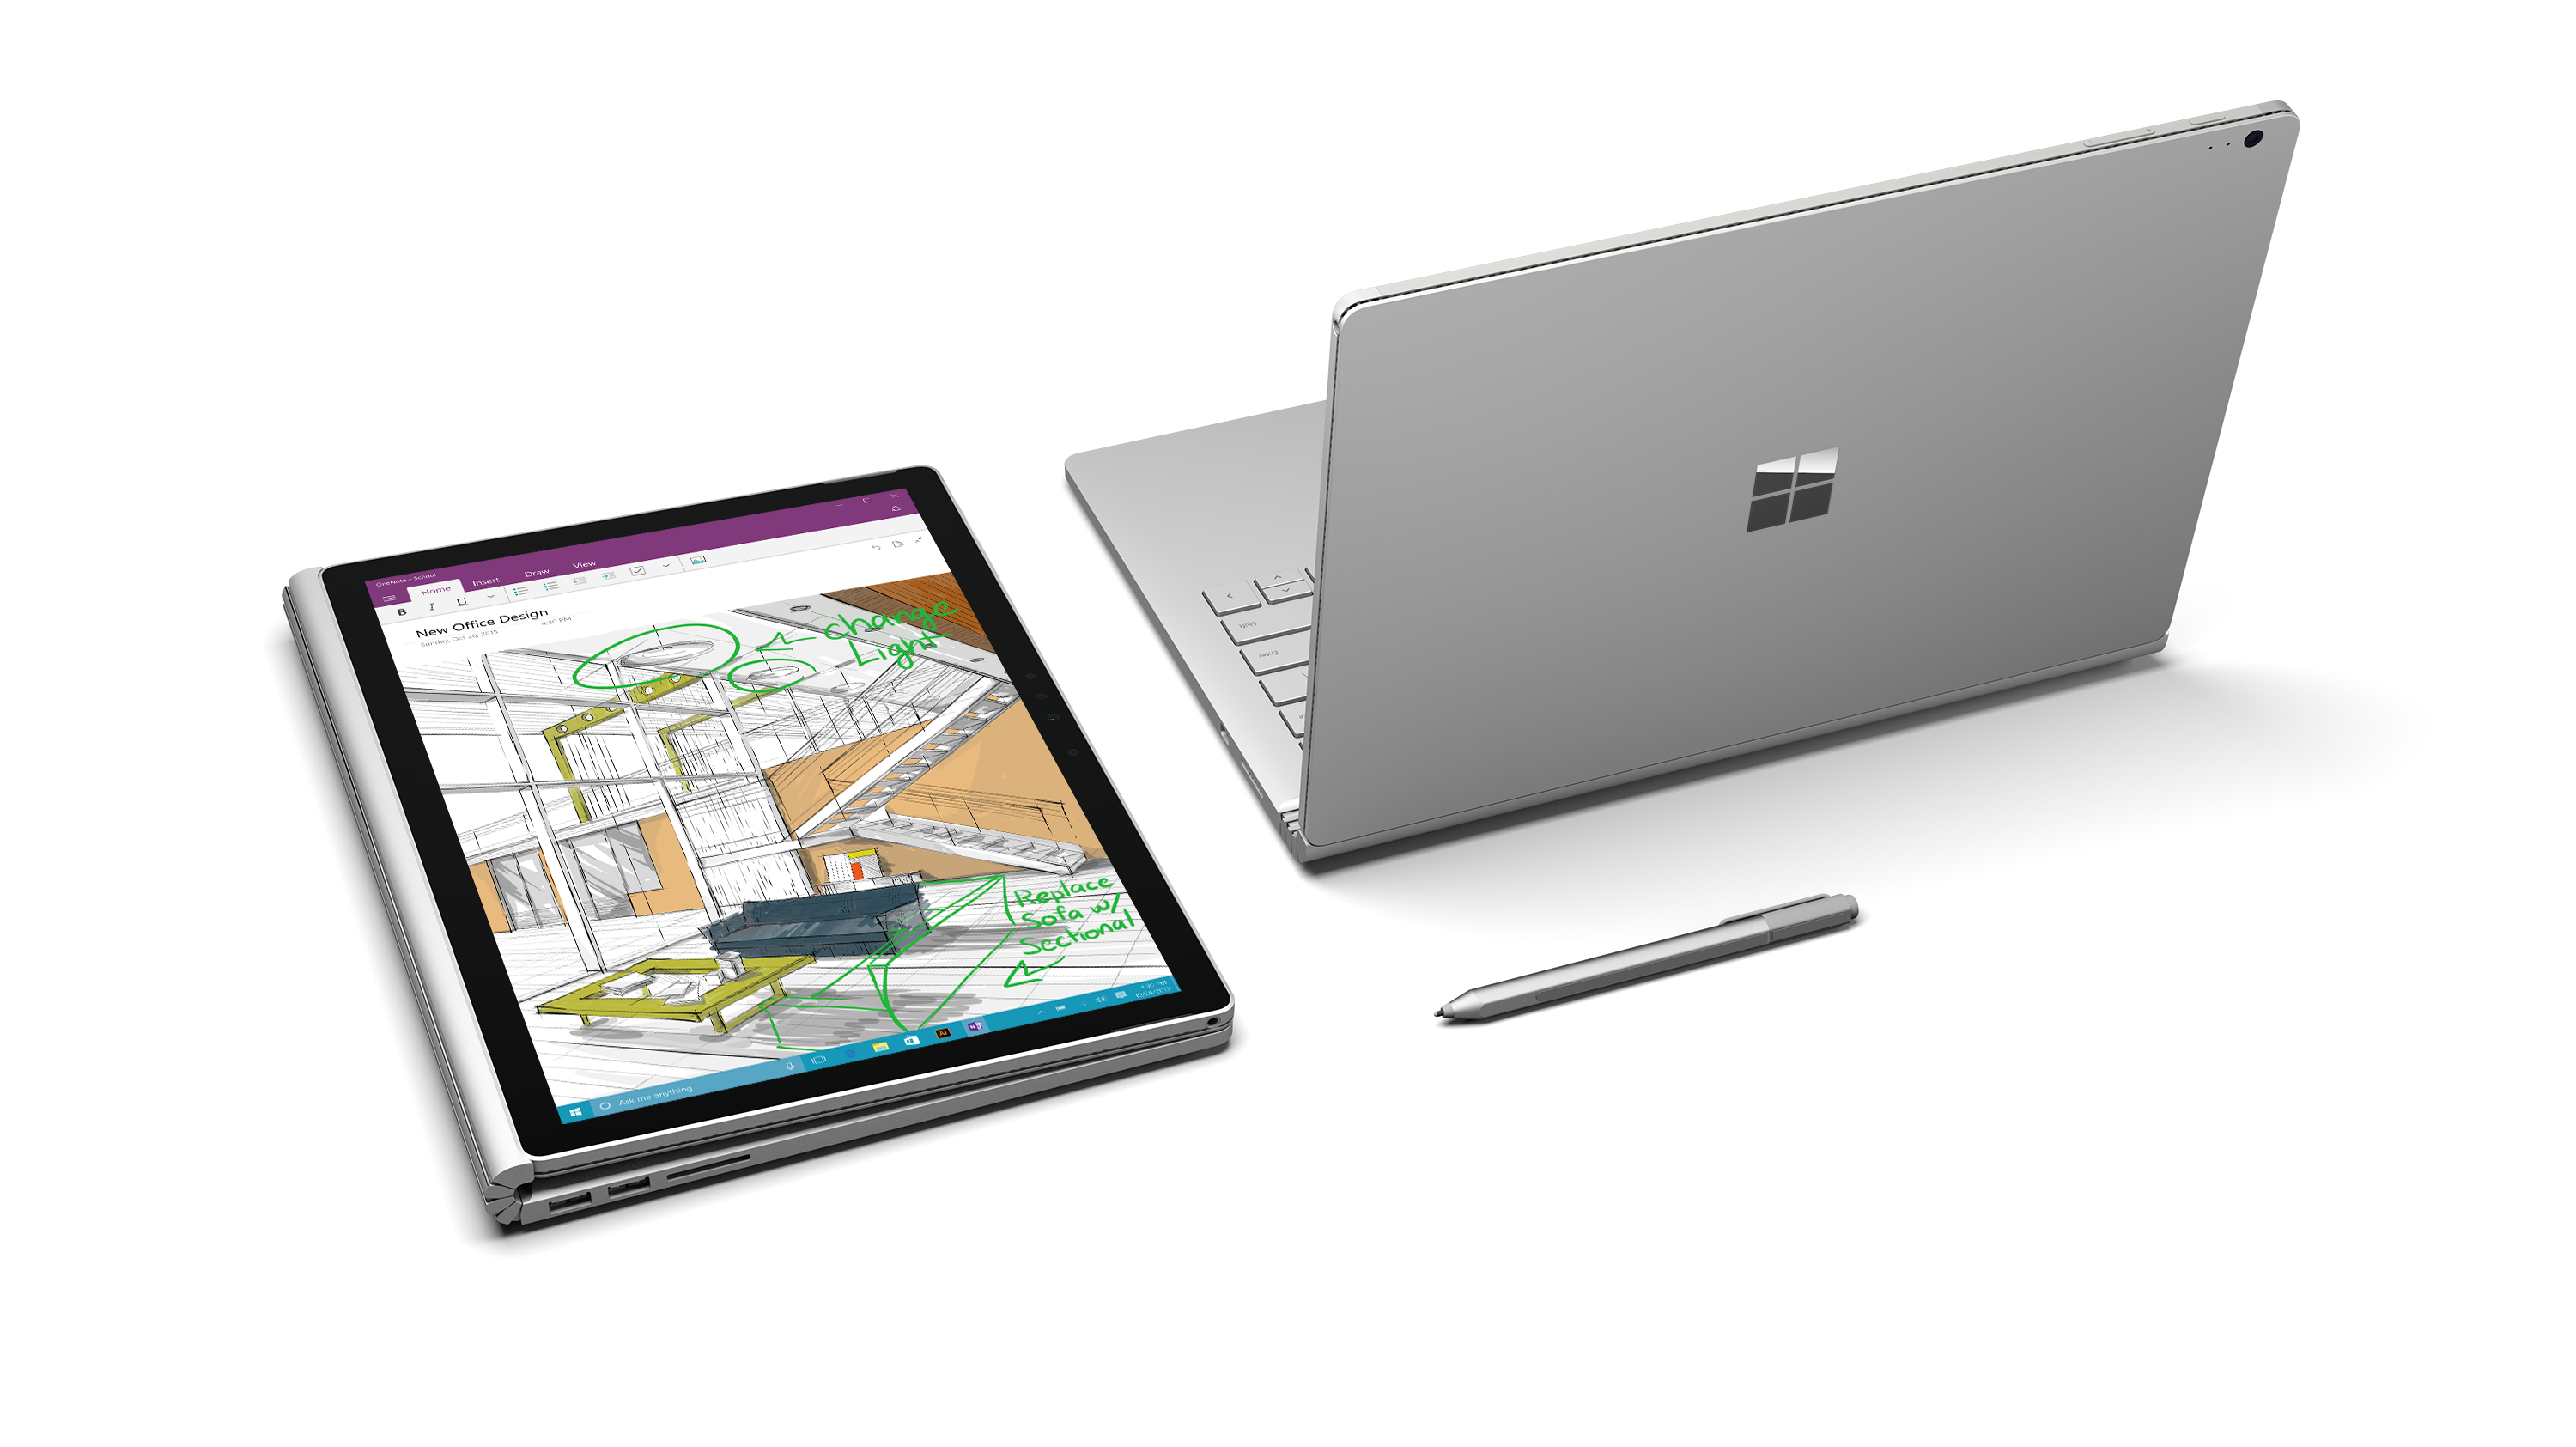 Surface Book Image Check Out The Hi Res Official